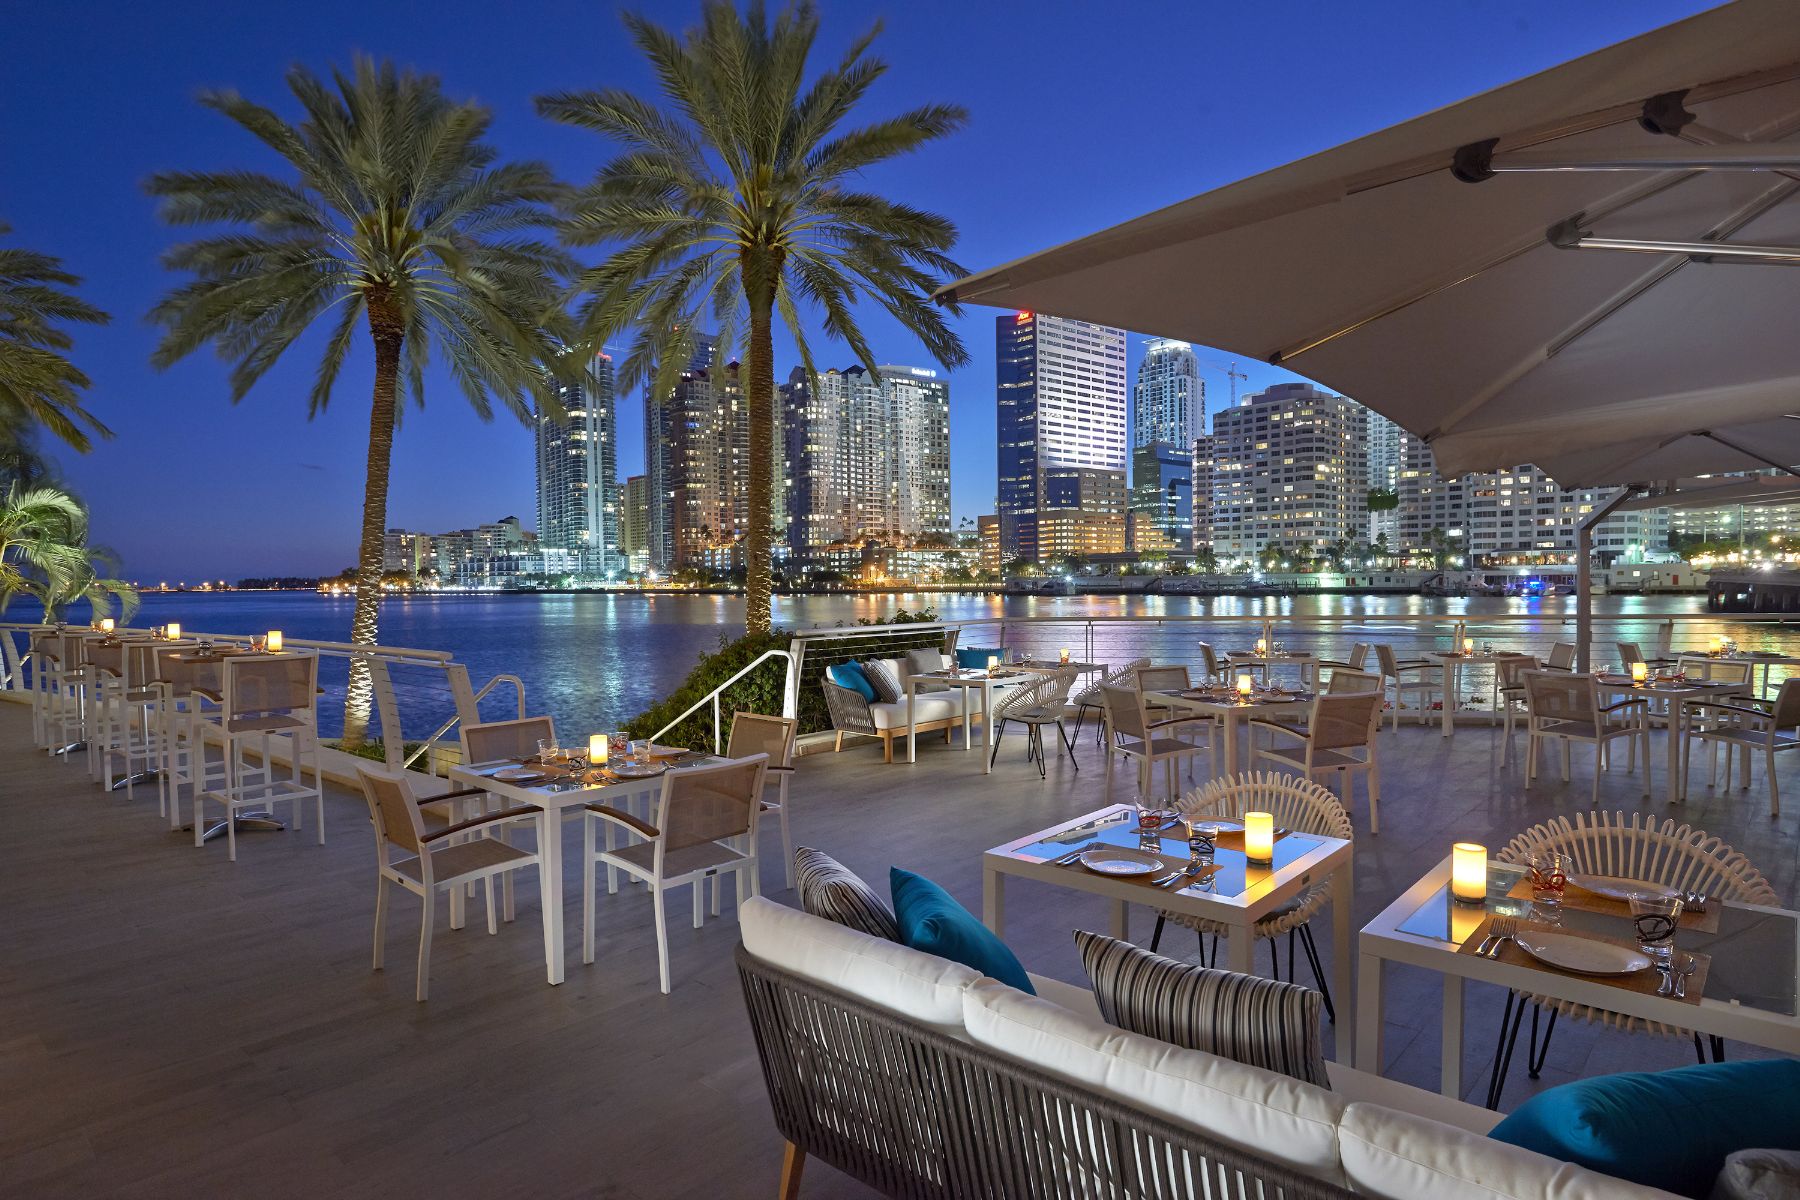 Miami-based United States eatery La Mar. Picture: Bloomberg.com